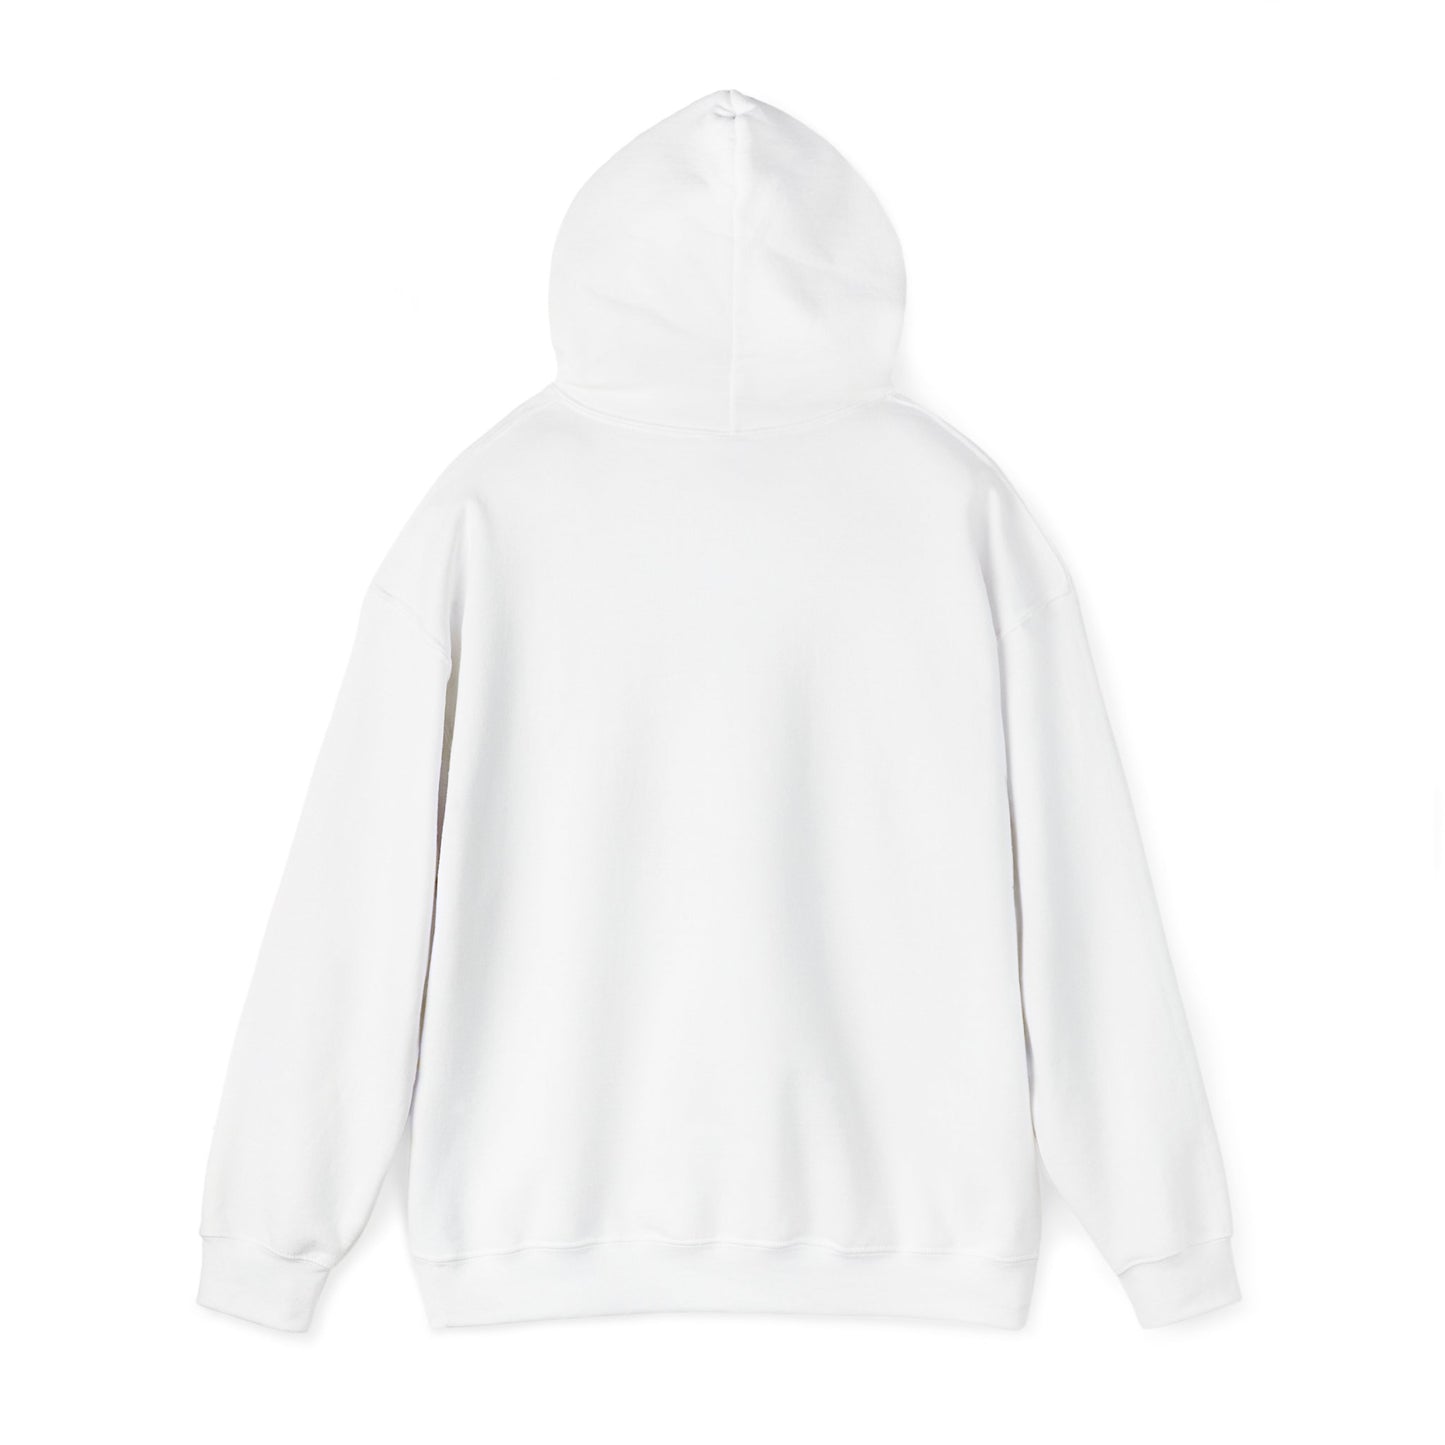 The Inside Out Hoodie